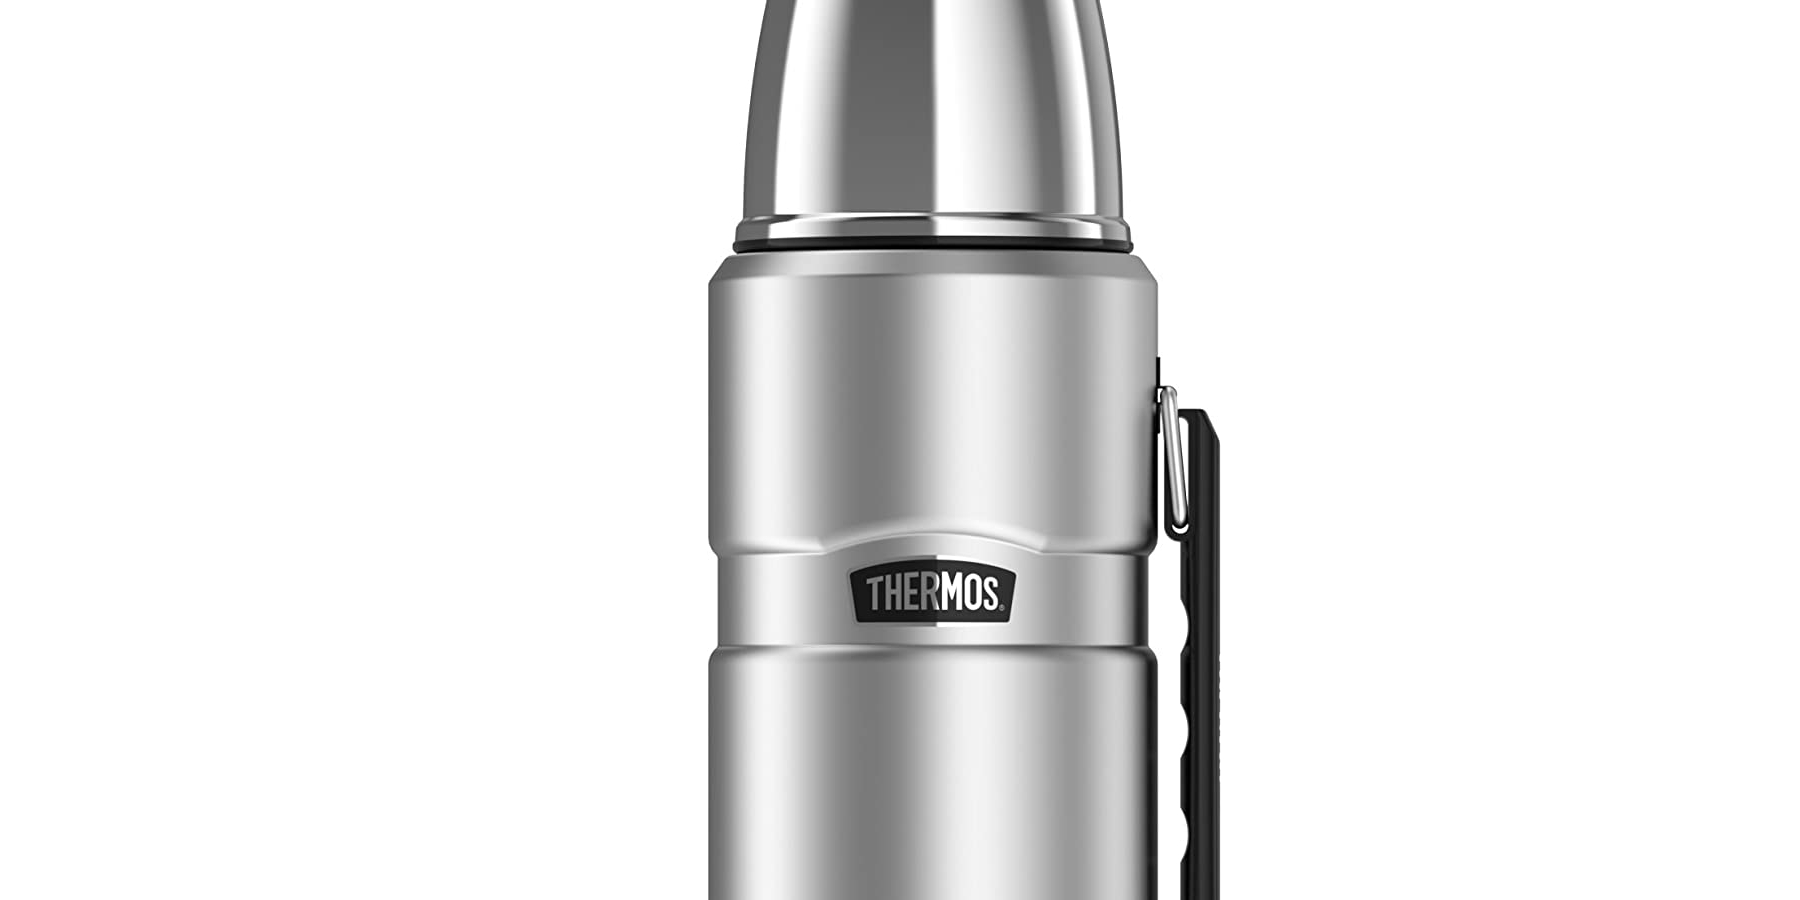 https://9to5toys.com/wp-content/uploads/sites/5/2020/07/Thermos-King-Vacuum-Insulated-Beverage-Bottle.jpg